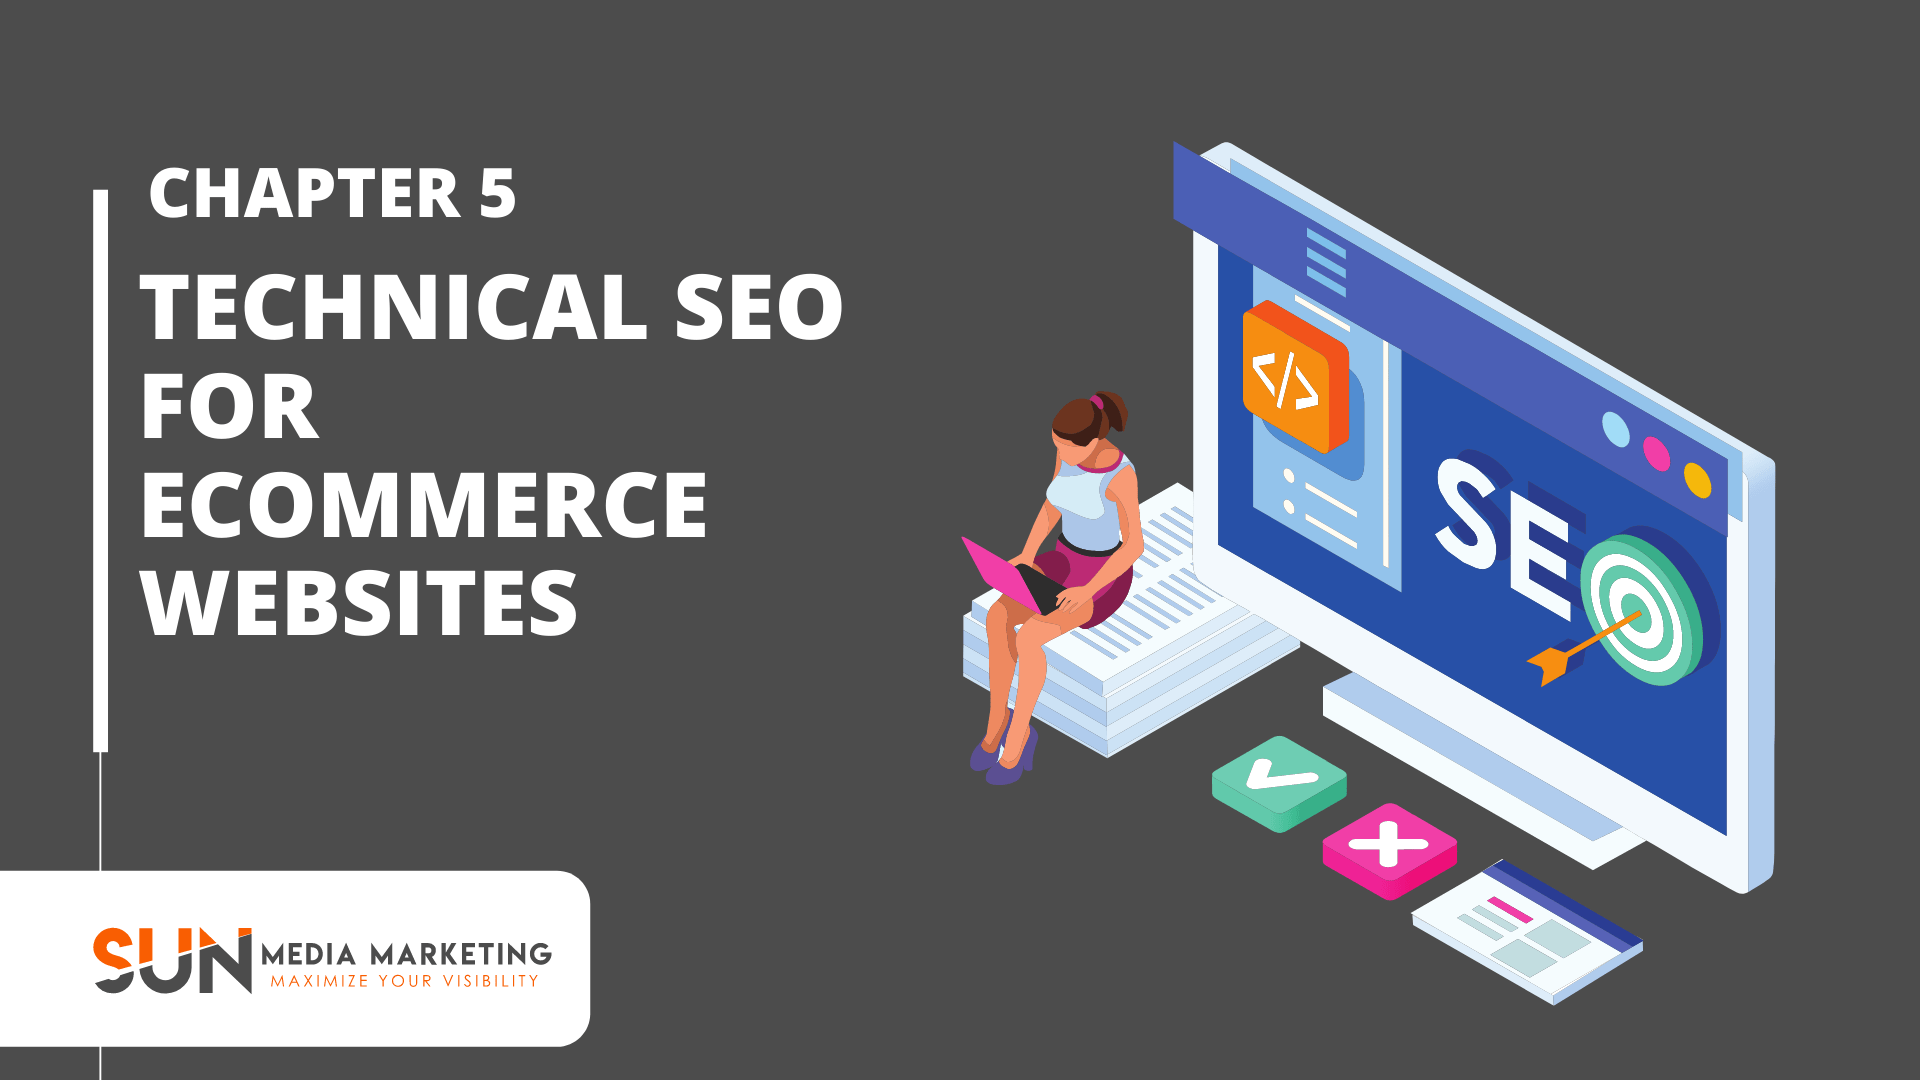 Technical SEO for eCommerce Websites